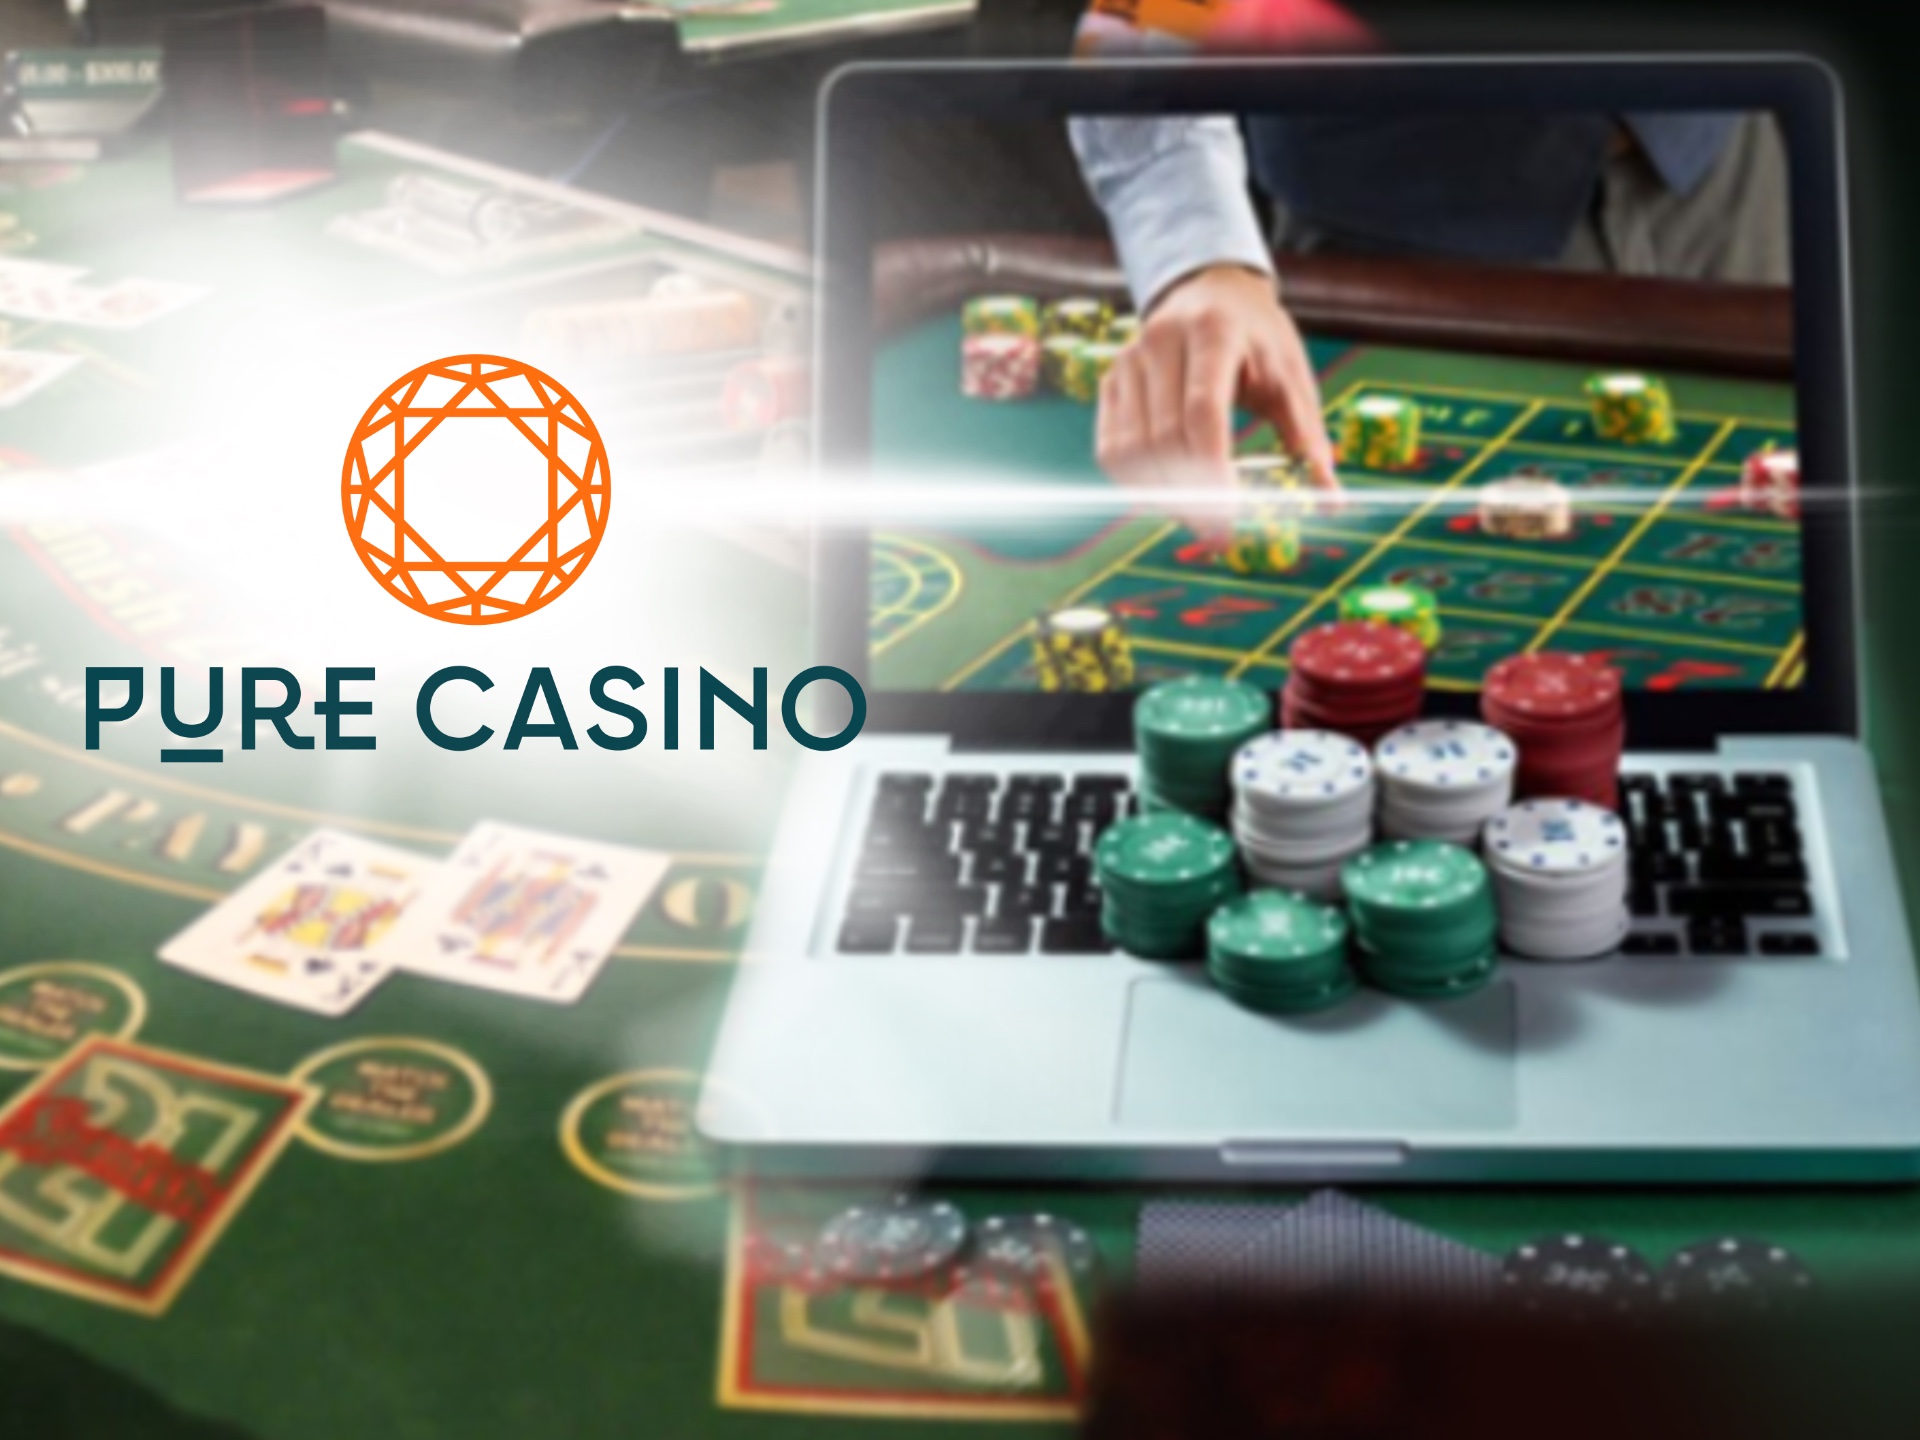 Get the Pure Casino welcome bonus and start your profitable gambling.